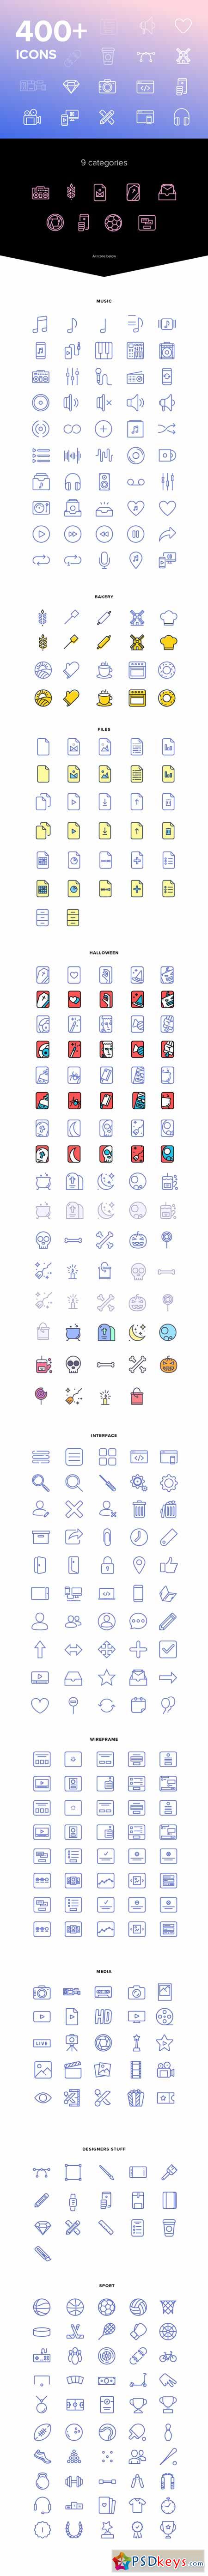 400+ Vector Icons pack, UI, Media 561649